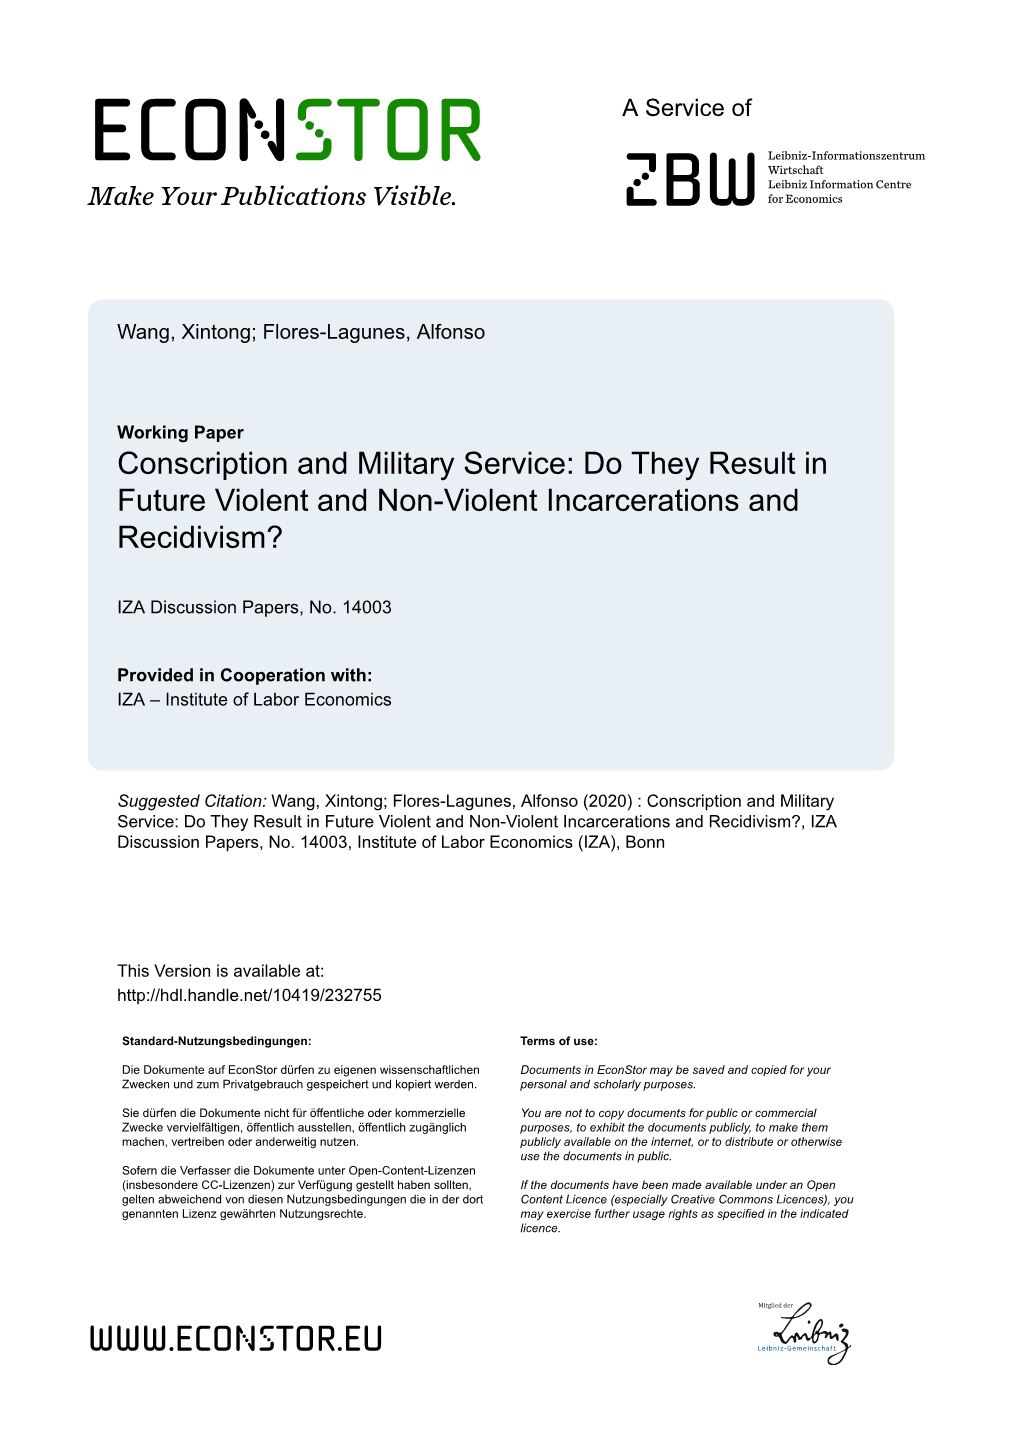 Conscription and Military Service: Do They Result in Future Violent and Non-Violent Incarcerations and Recidivism?